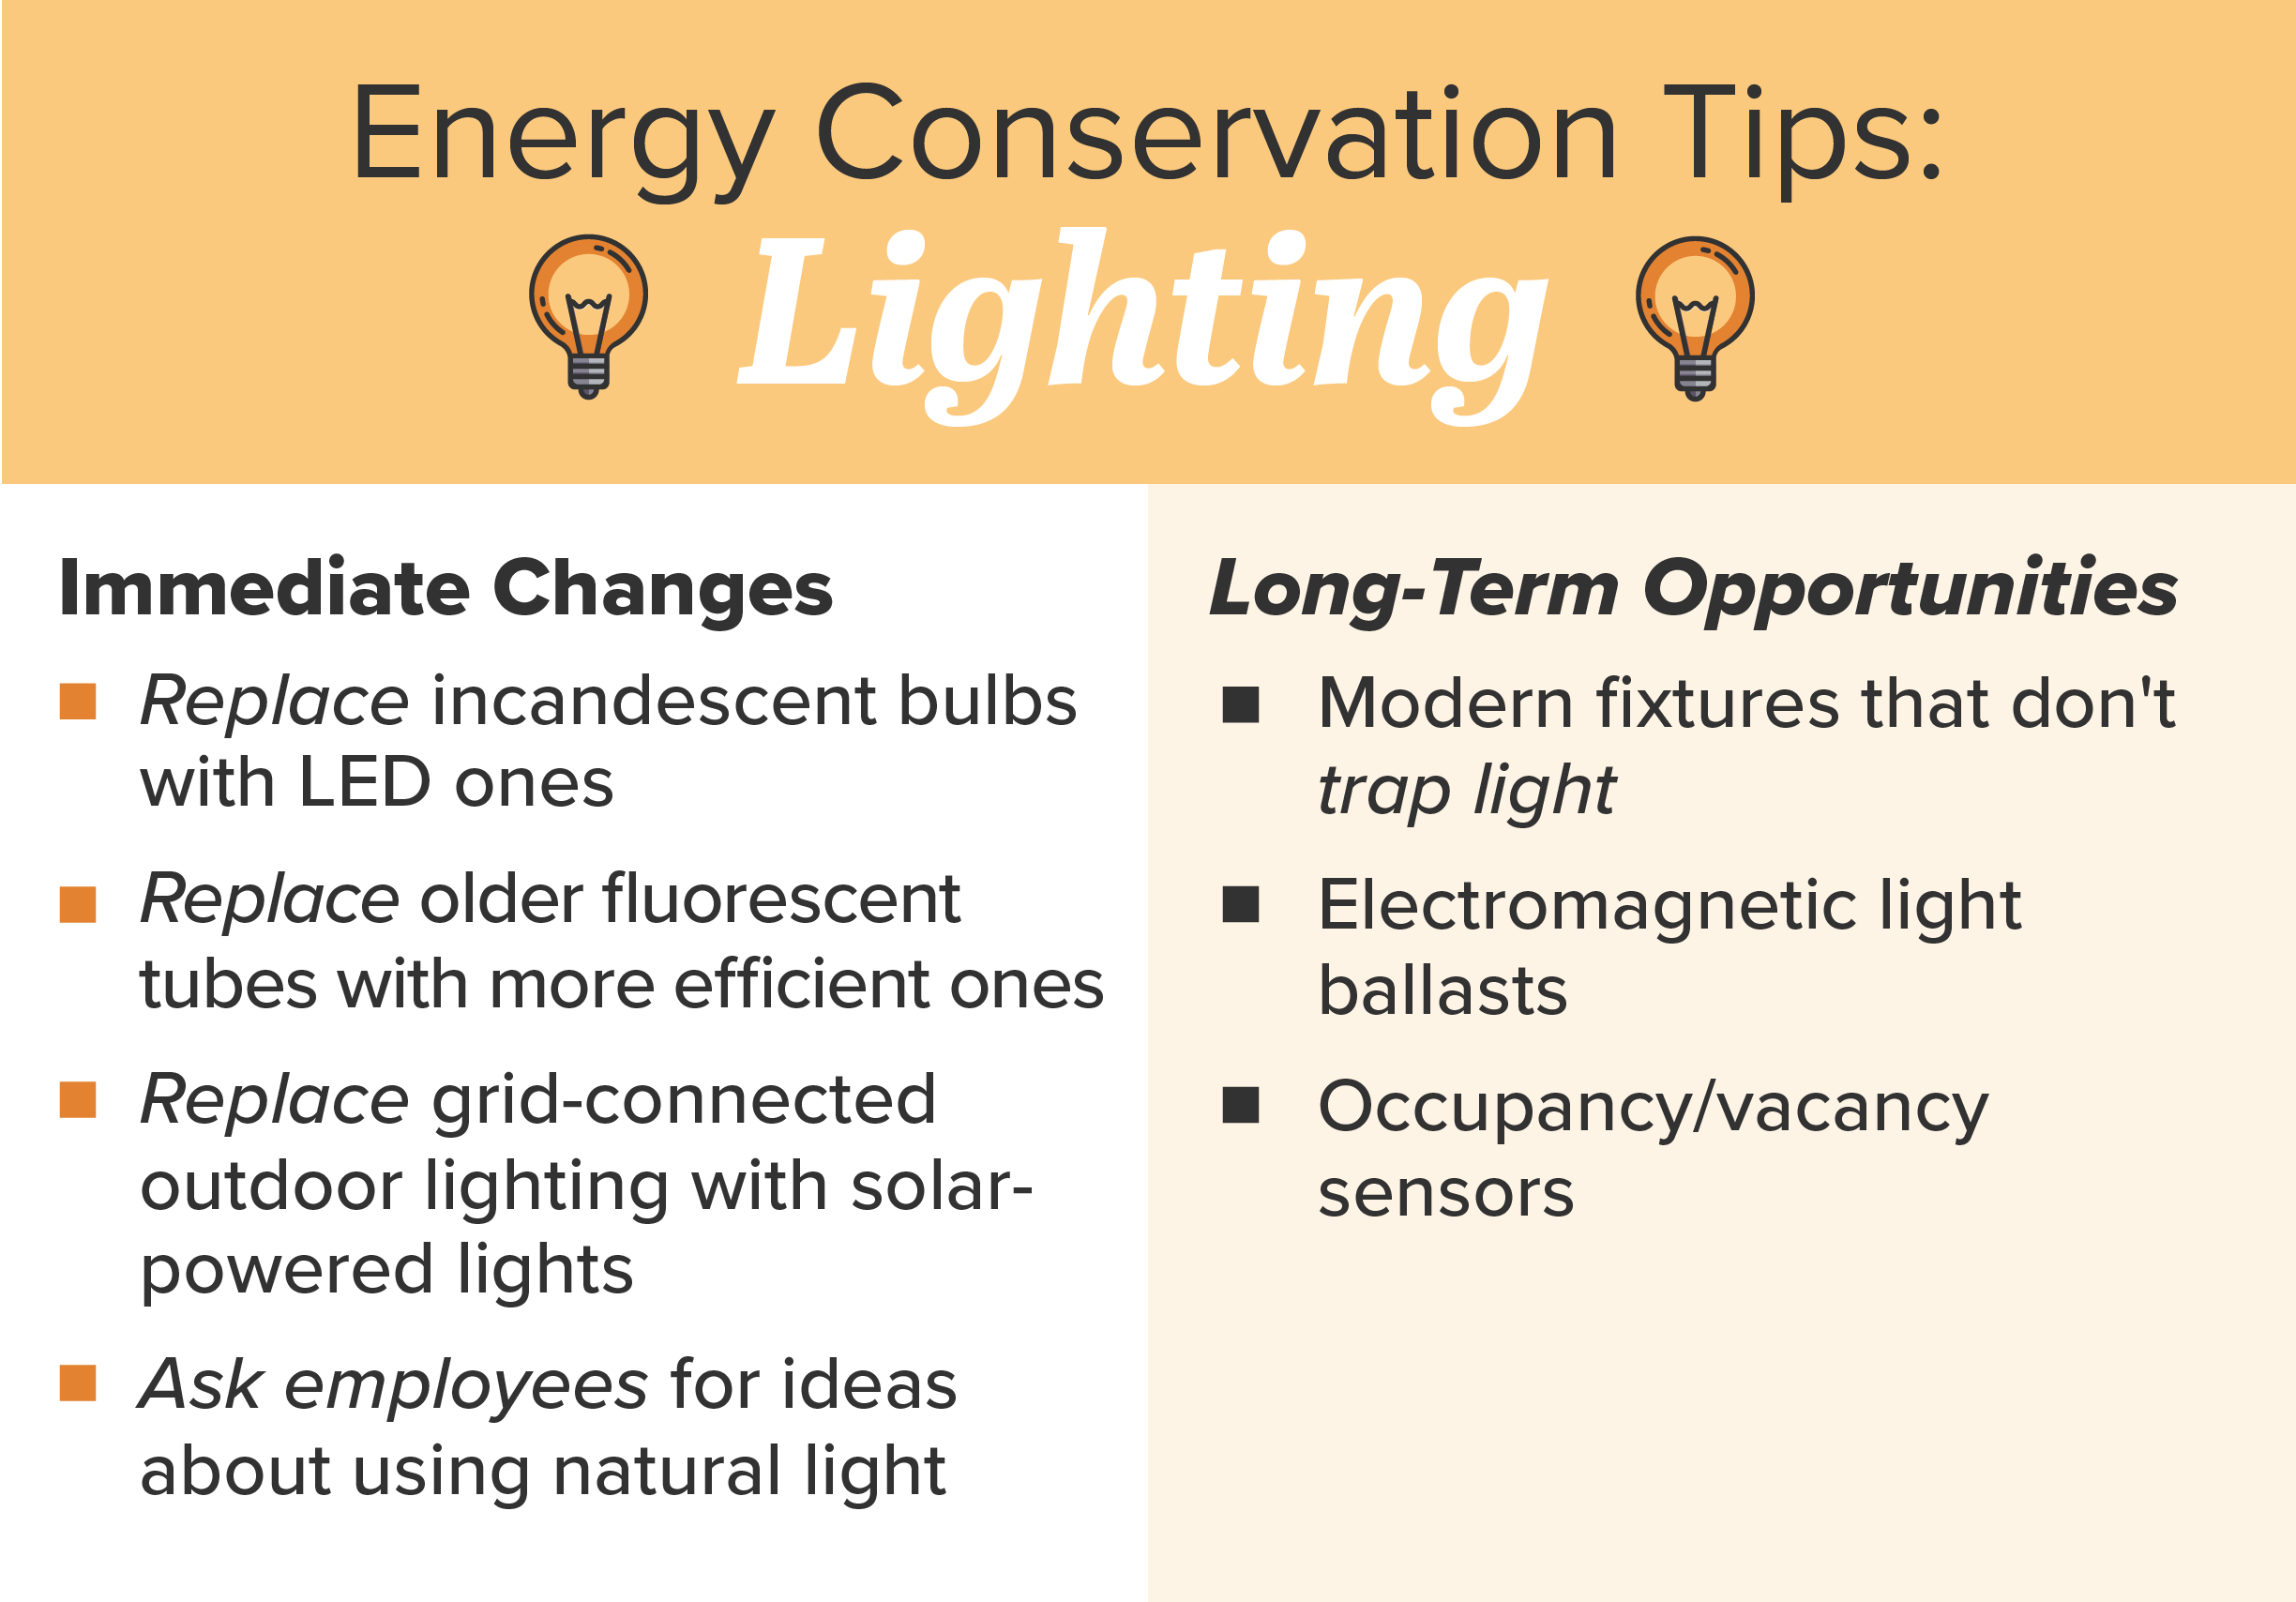 Energy conservation recommendations